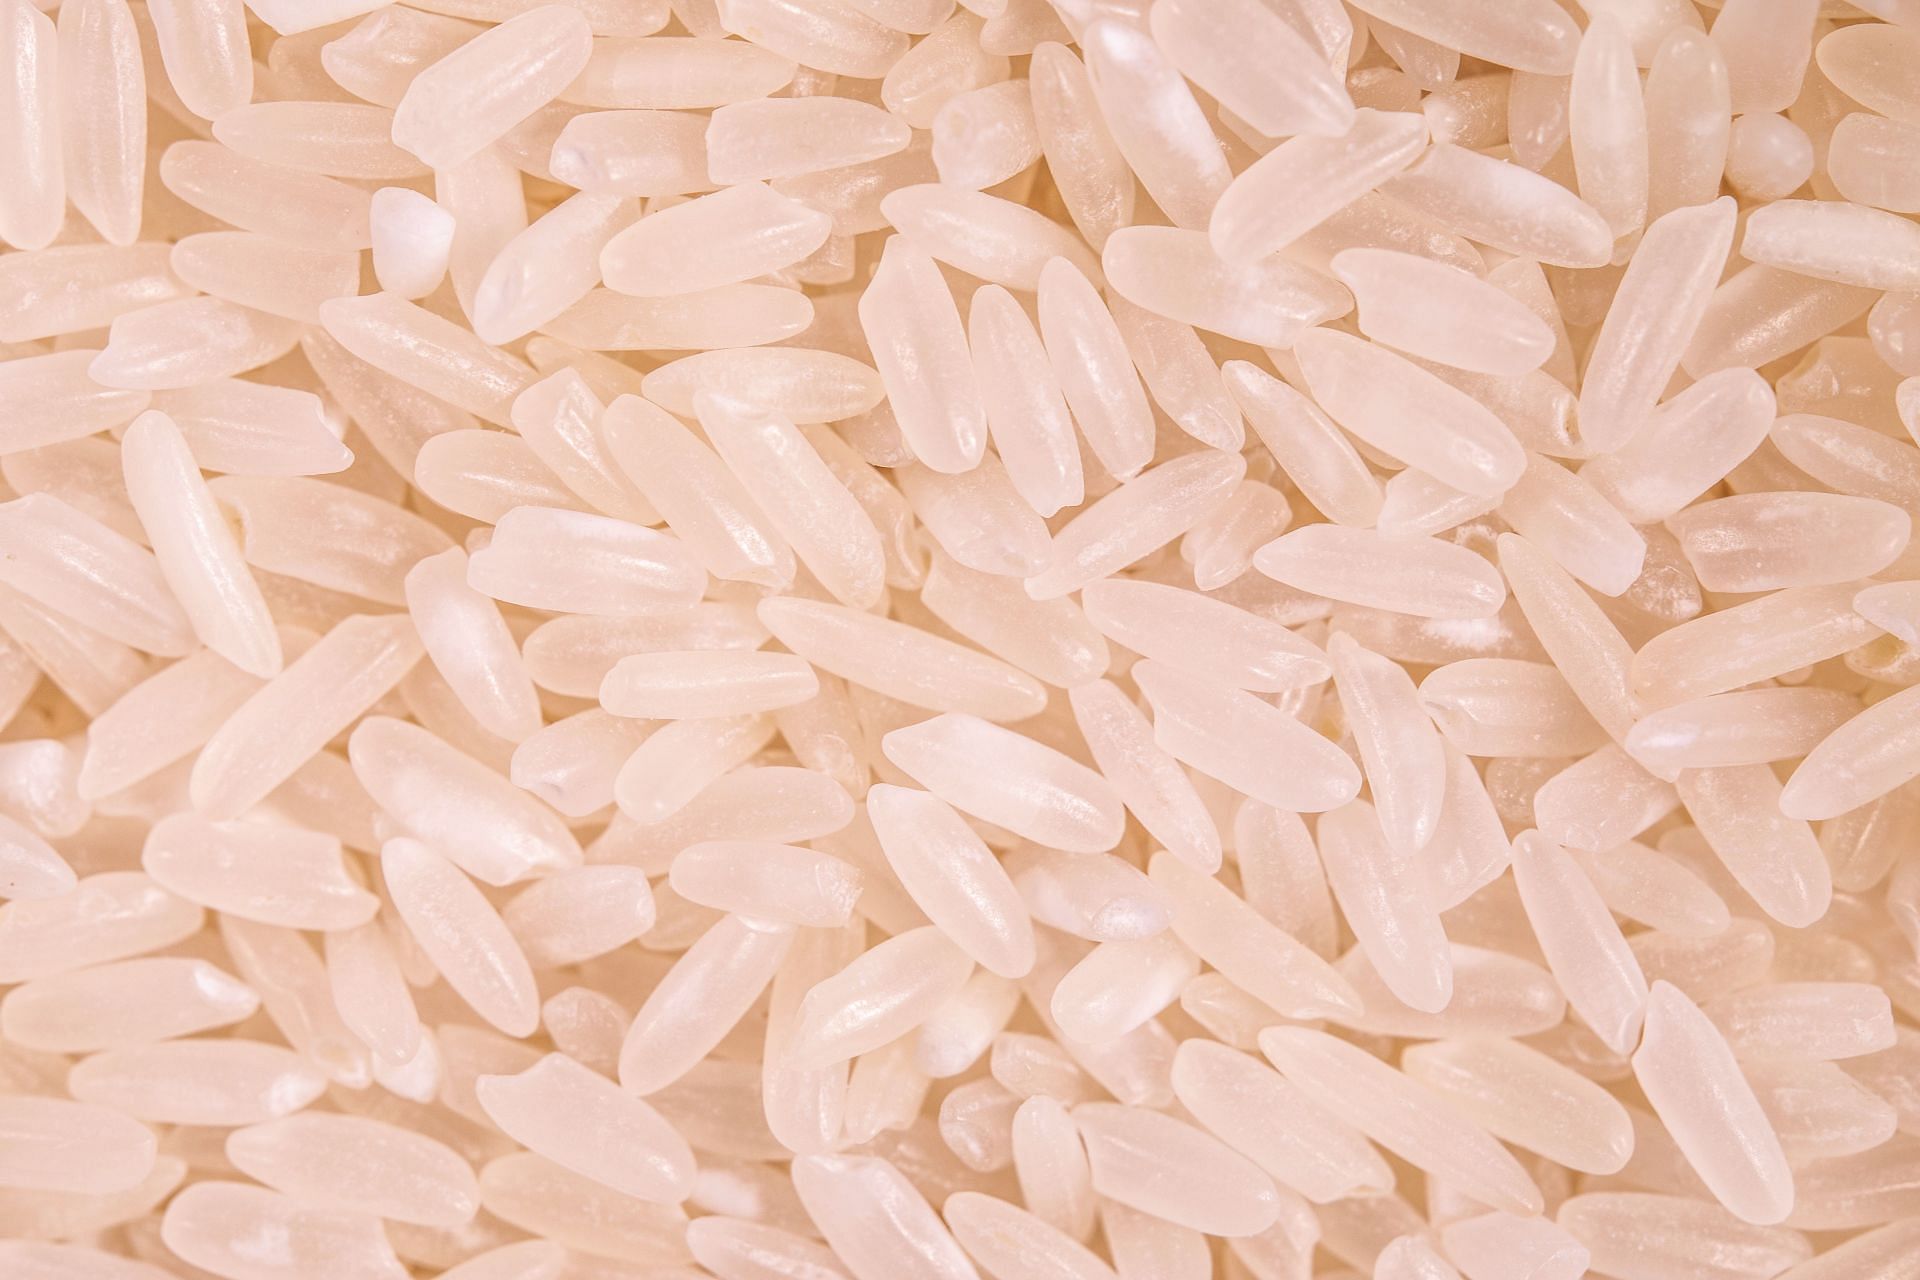 Close up picture of the raw rice. (Image via Pexels/Ruandom Zhong)